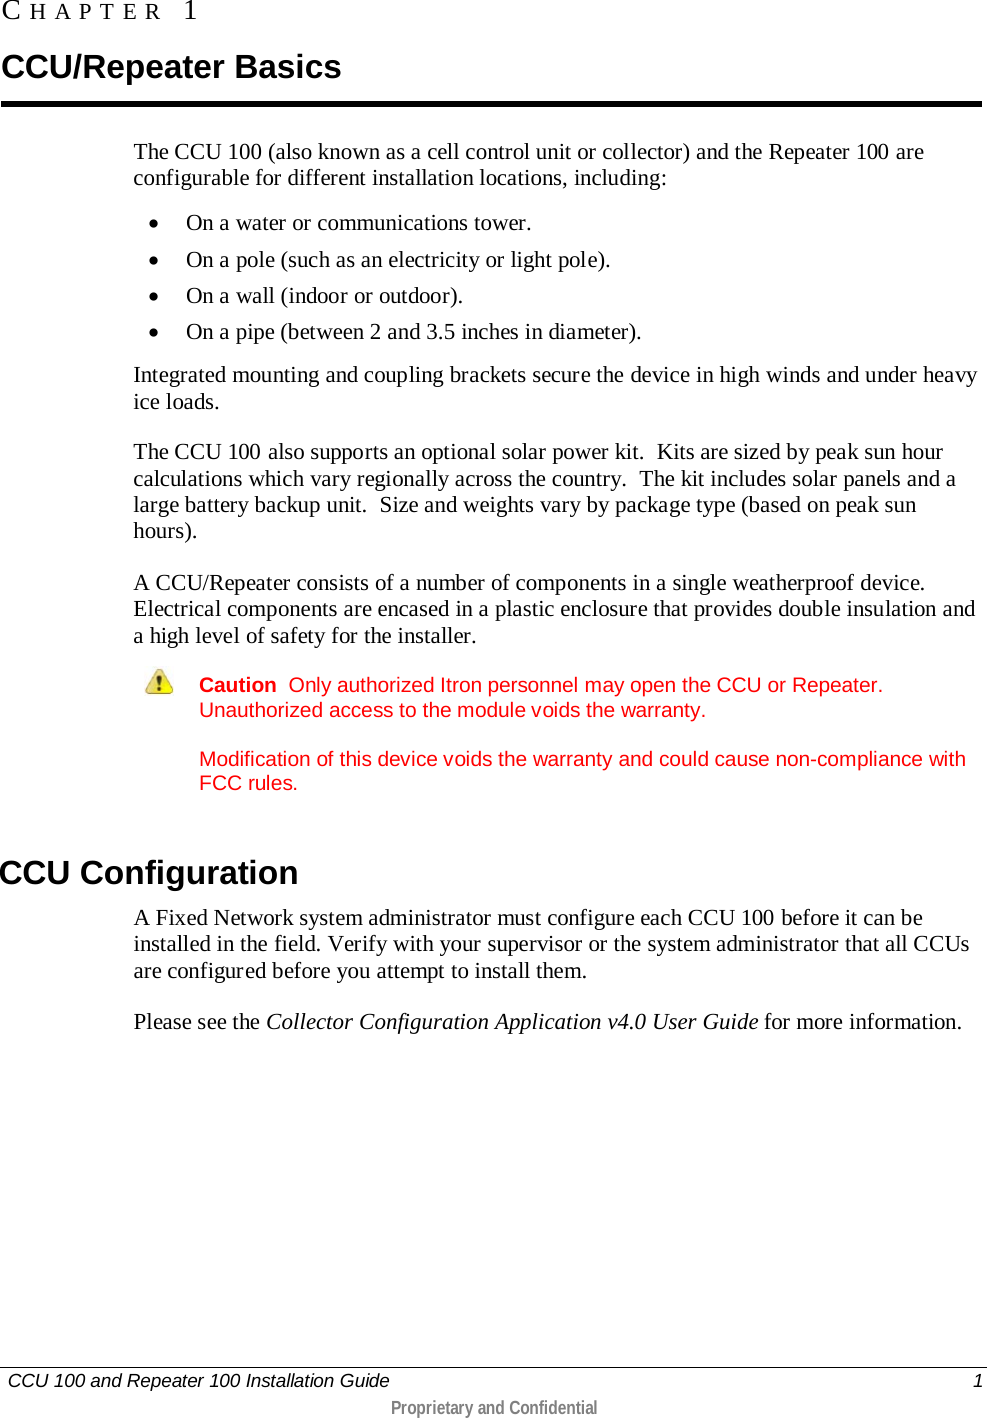   CCU 100 and Repeater 100 Installation Guide    1  Proprietary and Confidential  The CCU 100 (also known as a cell control unit or collector) and the Repeater 100 are configurable for different installation locations, including: • On a water or communications tower. • On a pole (such as an electricity or light pole). • On a wall (indoor or outdoor). • On a pipe (between 2 and 3.5 inches in diameter). Integrated mounting and coupling brackets secure the device in high winds and under heavy ice loads.  The CCU 100 also supports an optional solar power kit.  Kits are sized by peak sun hour calculations which vary regionally across the country.  The kit includes solar panels and a large battery backup unit.  Size and weights vary by package type (based on peak sun hours). A CCU/Repeater consists of a number of components in a single weatherproof device. Electrical components are encased in a plastic enclosure that provides double insulation and a high level of safety for the installer.  Caution  Only authorized Itron personnel may open the CCU or Repeater. Unauthorized access to the module voids the warranty. Modification of this device voids the warranty and could cause non-compliance with FCC rules.   CCU Configuration A Fixed Network system administrator must configure each CCU 100 before it can be installed in the field. Verify with your supervisor or the system administrator that all CCUs are configured before you attempt to install them.  Please see the Collector Configuration Application v4.0 User Guide for more information.   CHAPTER 1  CCU/Repeater Basics 